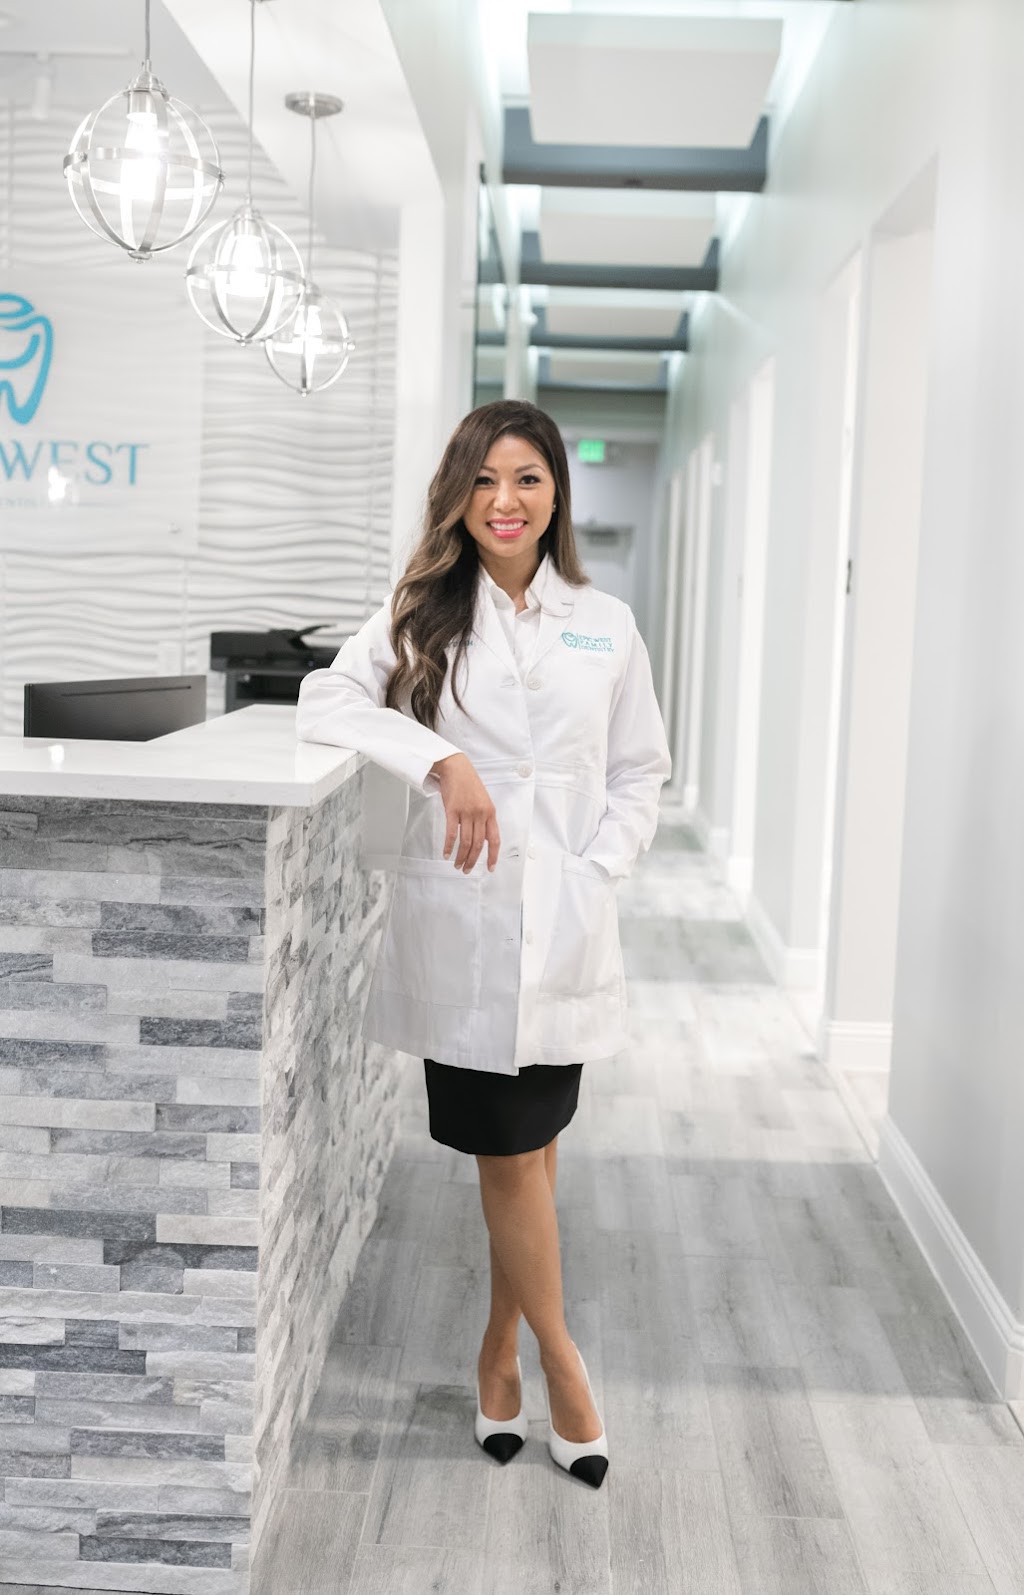 Epic West Family Dentistry | 3166 S State Hwy 161 Suite 190, Grand Prairie, TX 75052, USA | Phone: (972) 544-1592